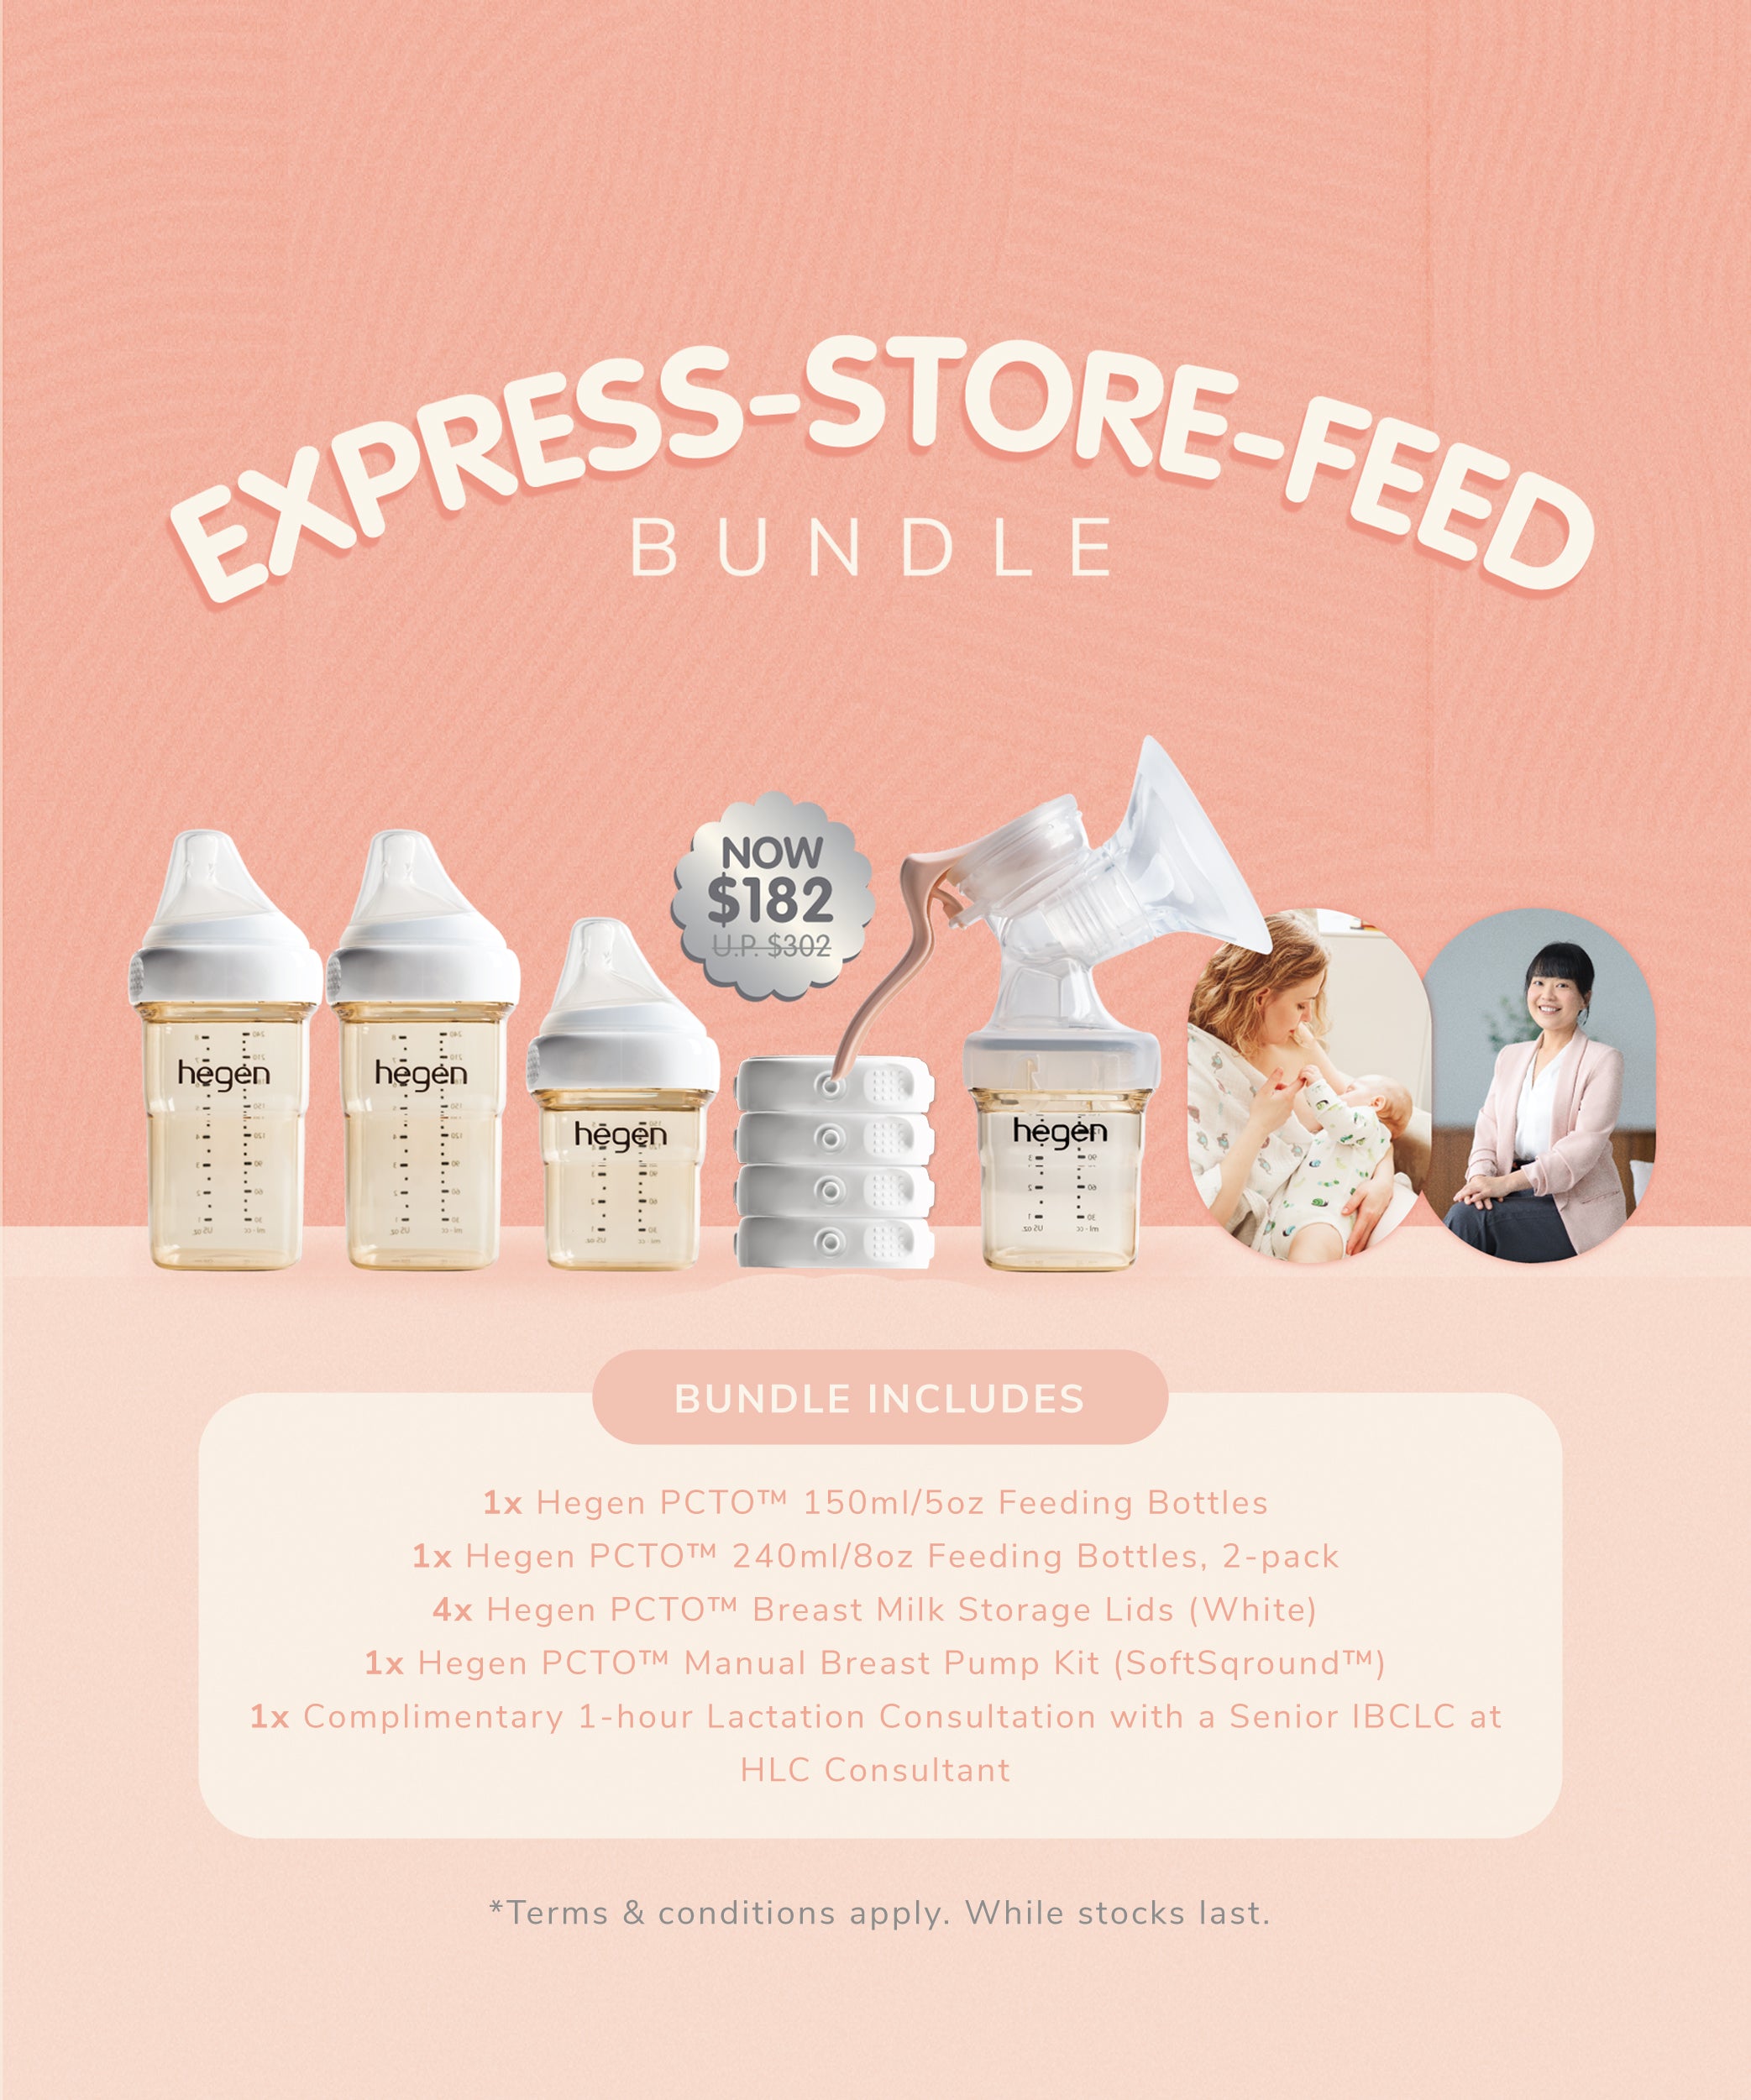 express store feed bundle mobile layout